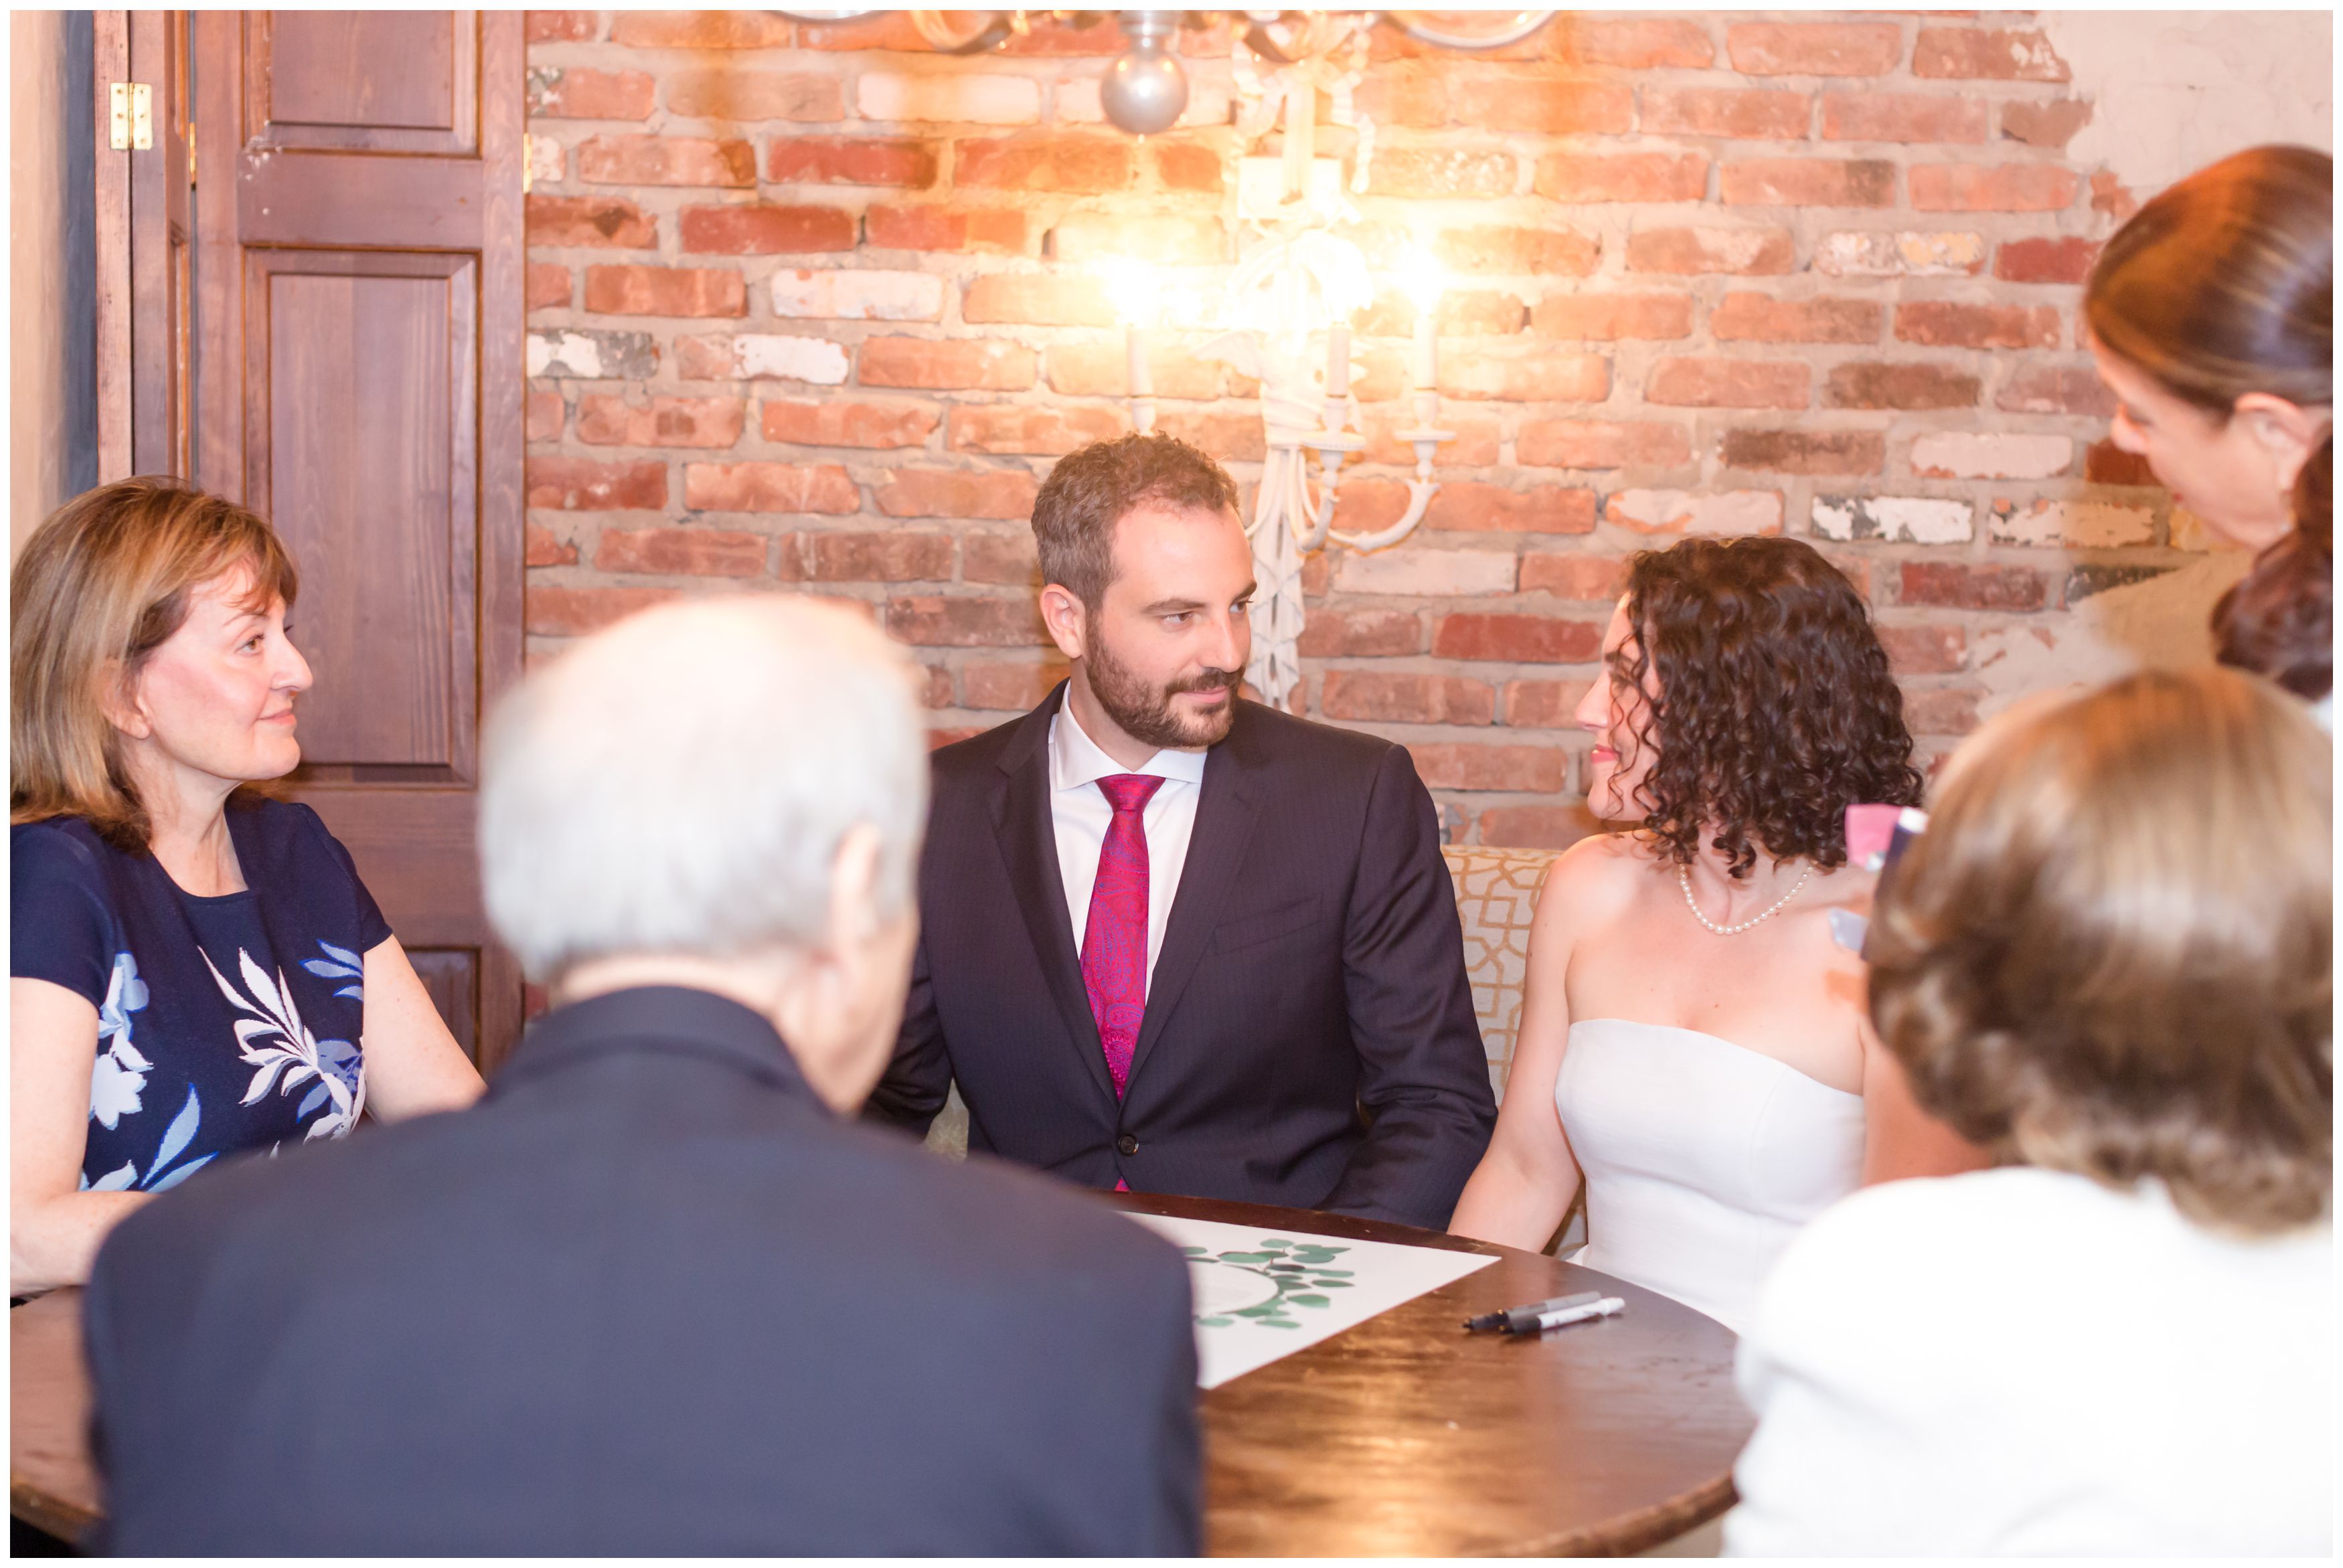 Bride and groom and family and the Ketubah signing